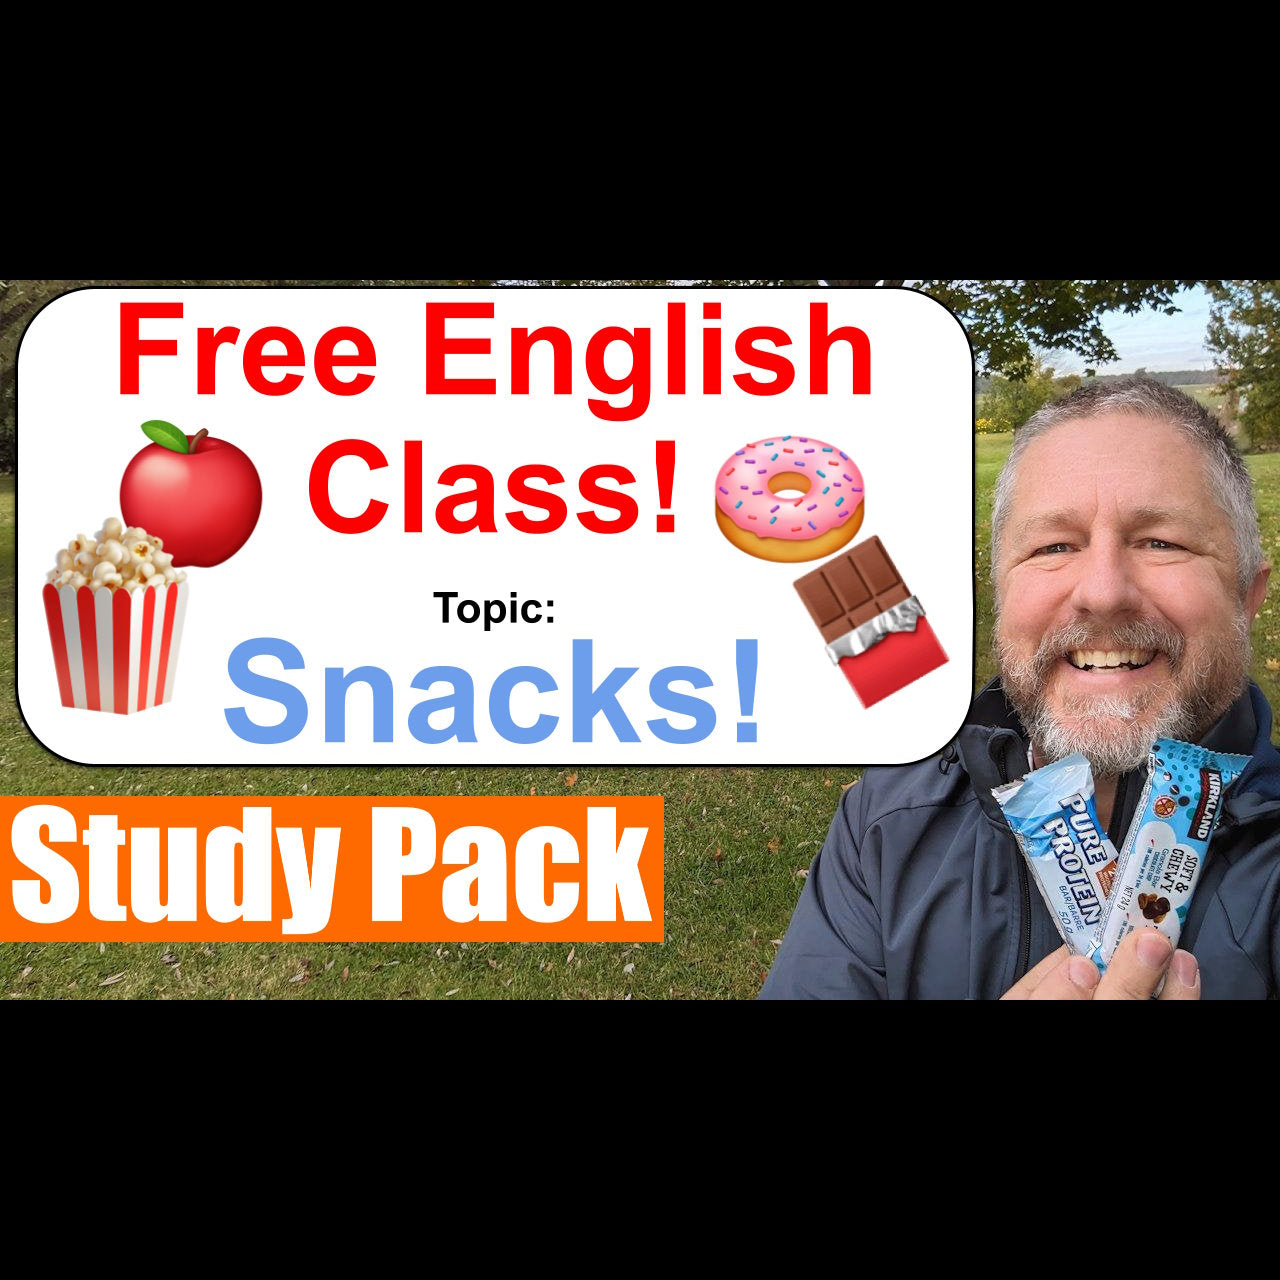 Let's Learn English! Topic: Snacks